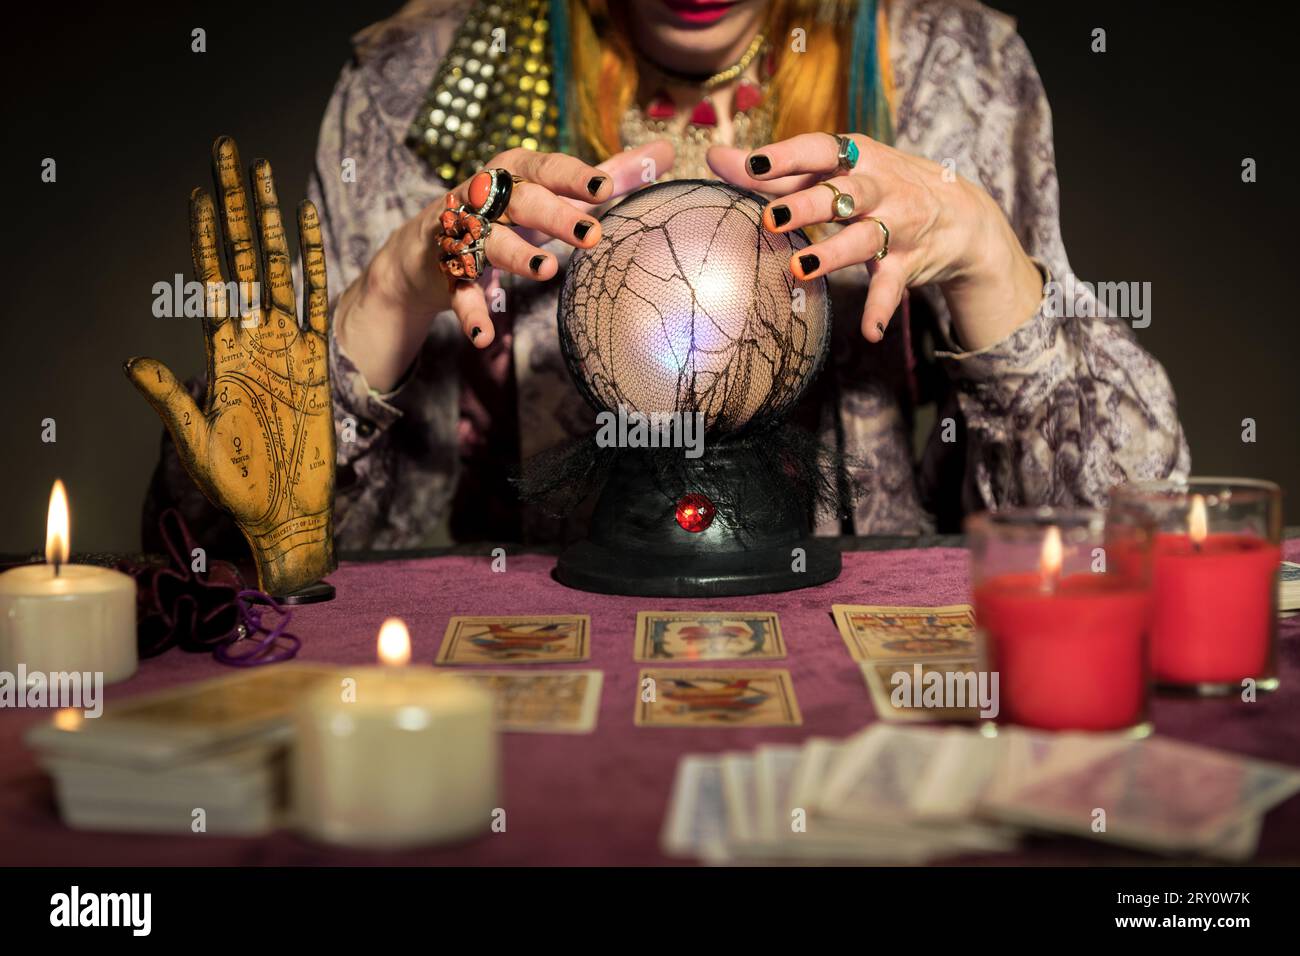 Crop anonymous fortune teller female looking down while sitting at table with hovering fingers on crystal ball burning candles blurred cards and palmi Stock Photo